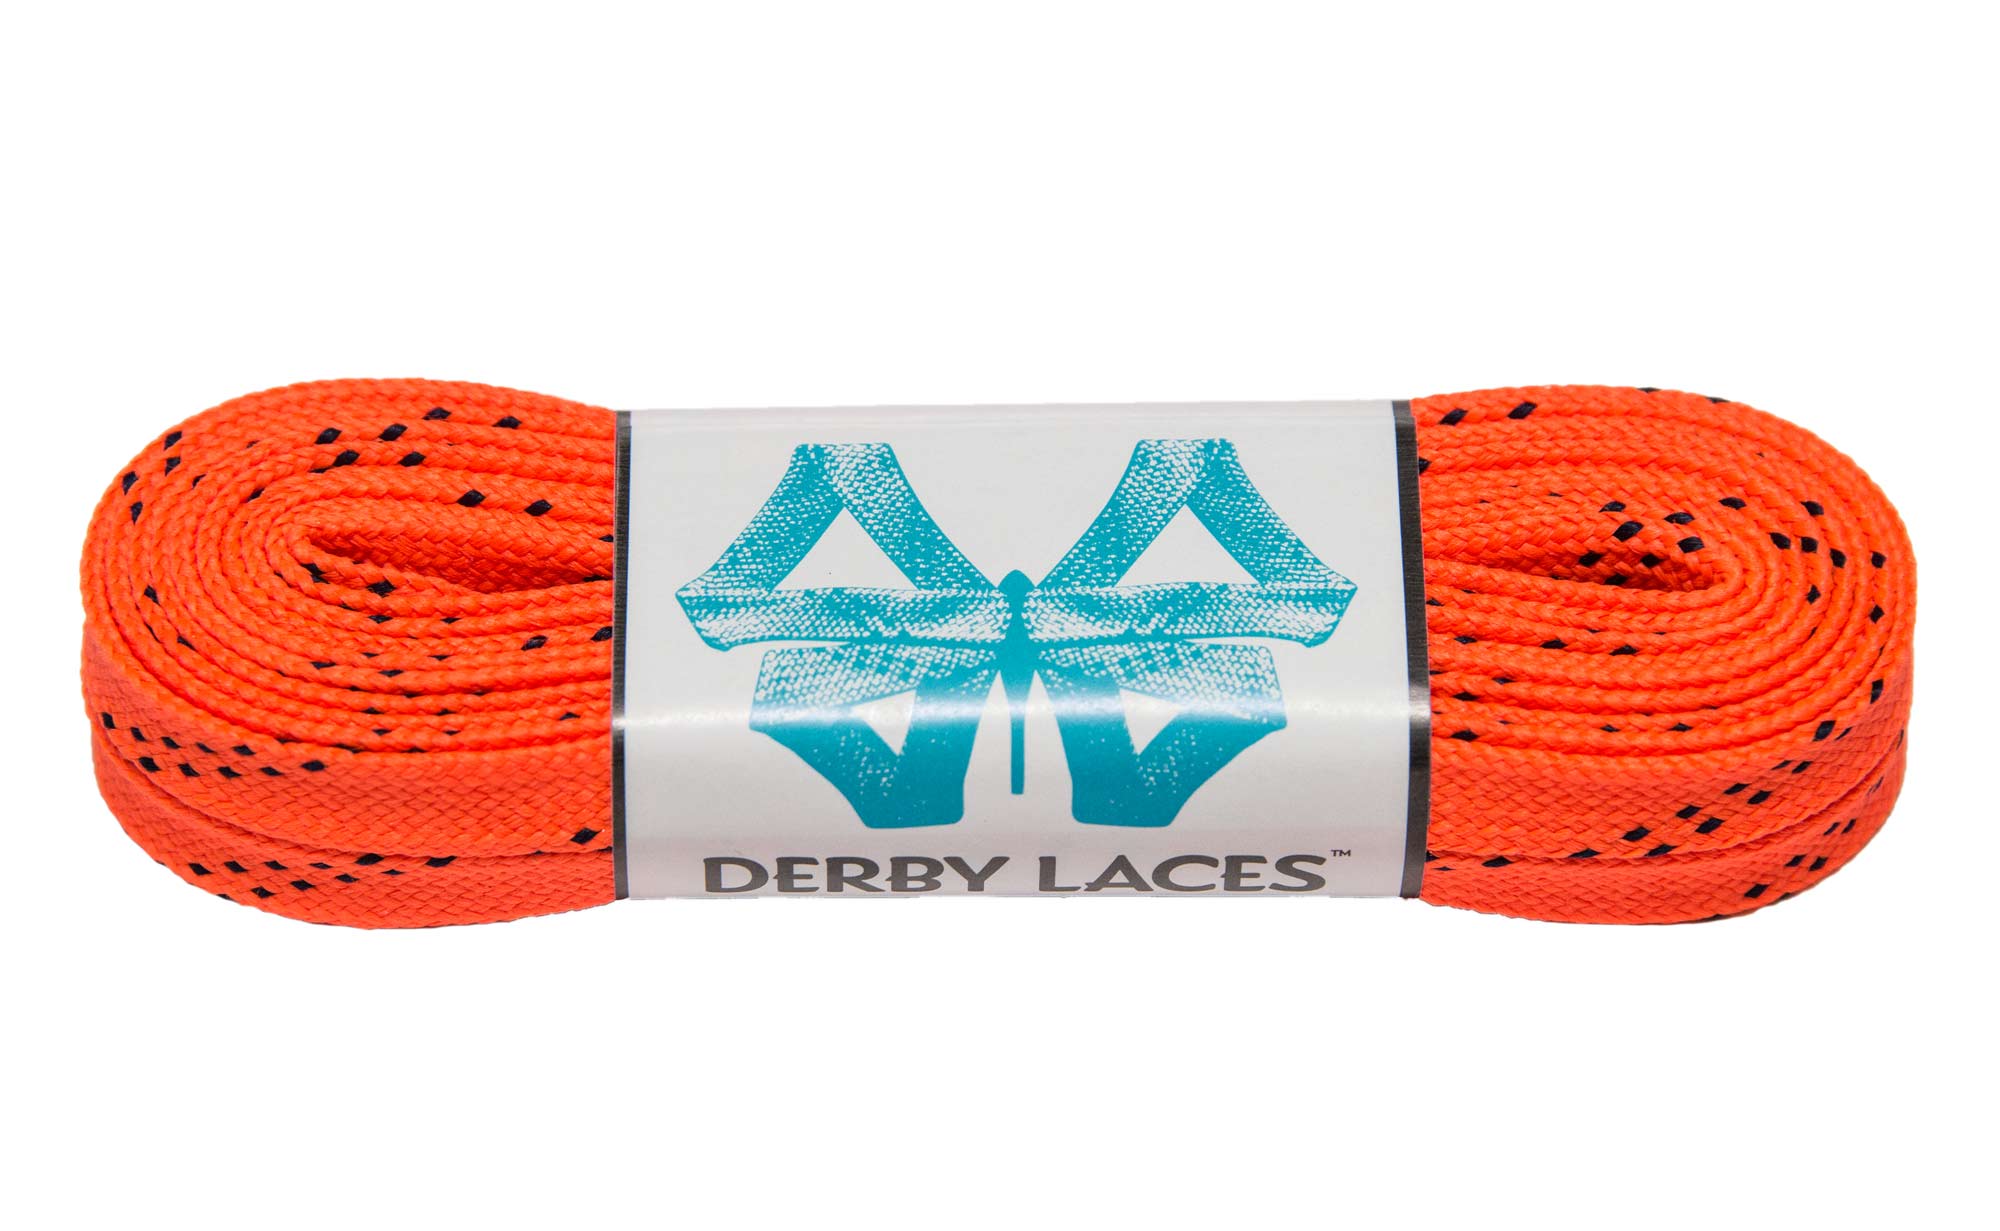 Derby Laces CORE Narrow 6mm Waxed Lace for Figure Skates, Roller Skates,  Boots, and Regular Shoes